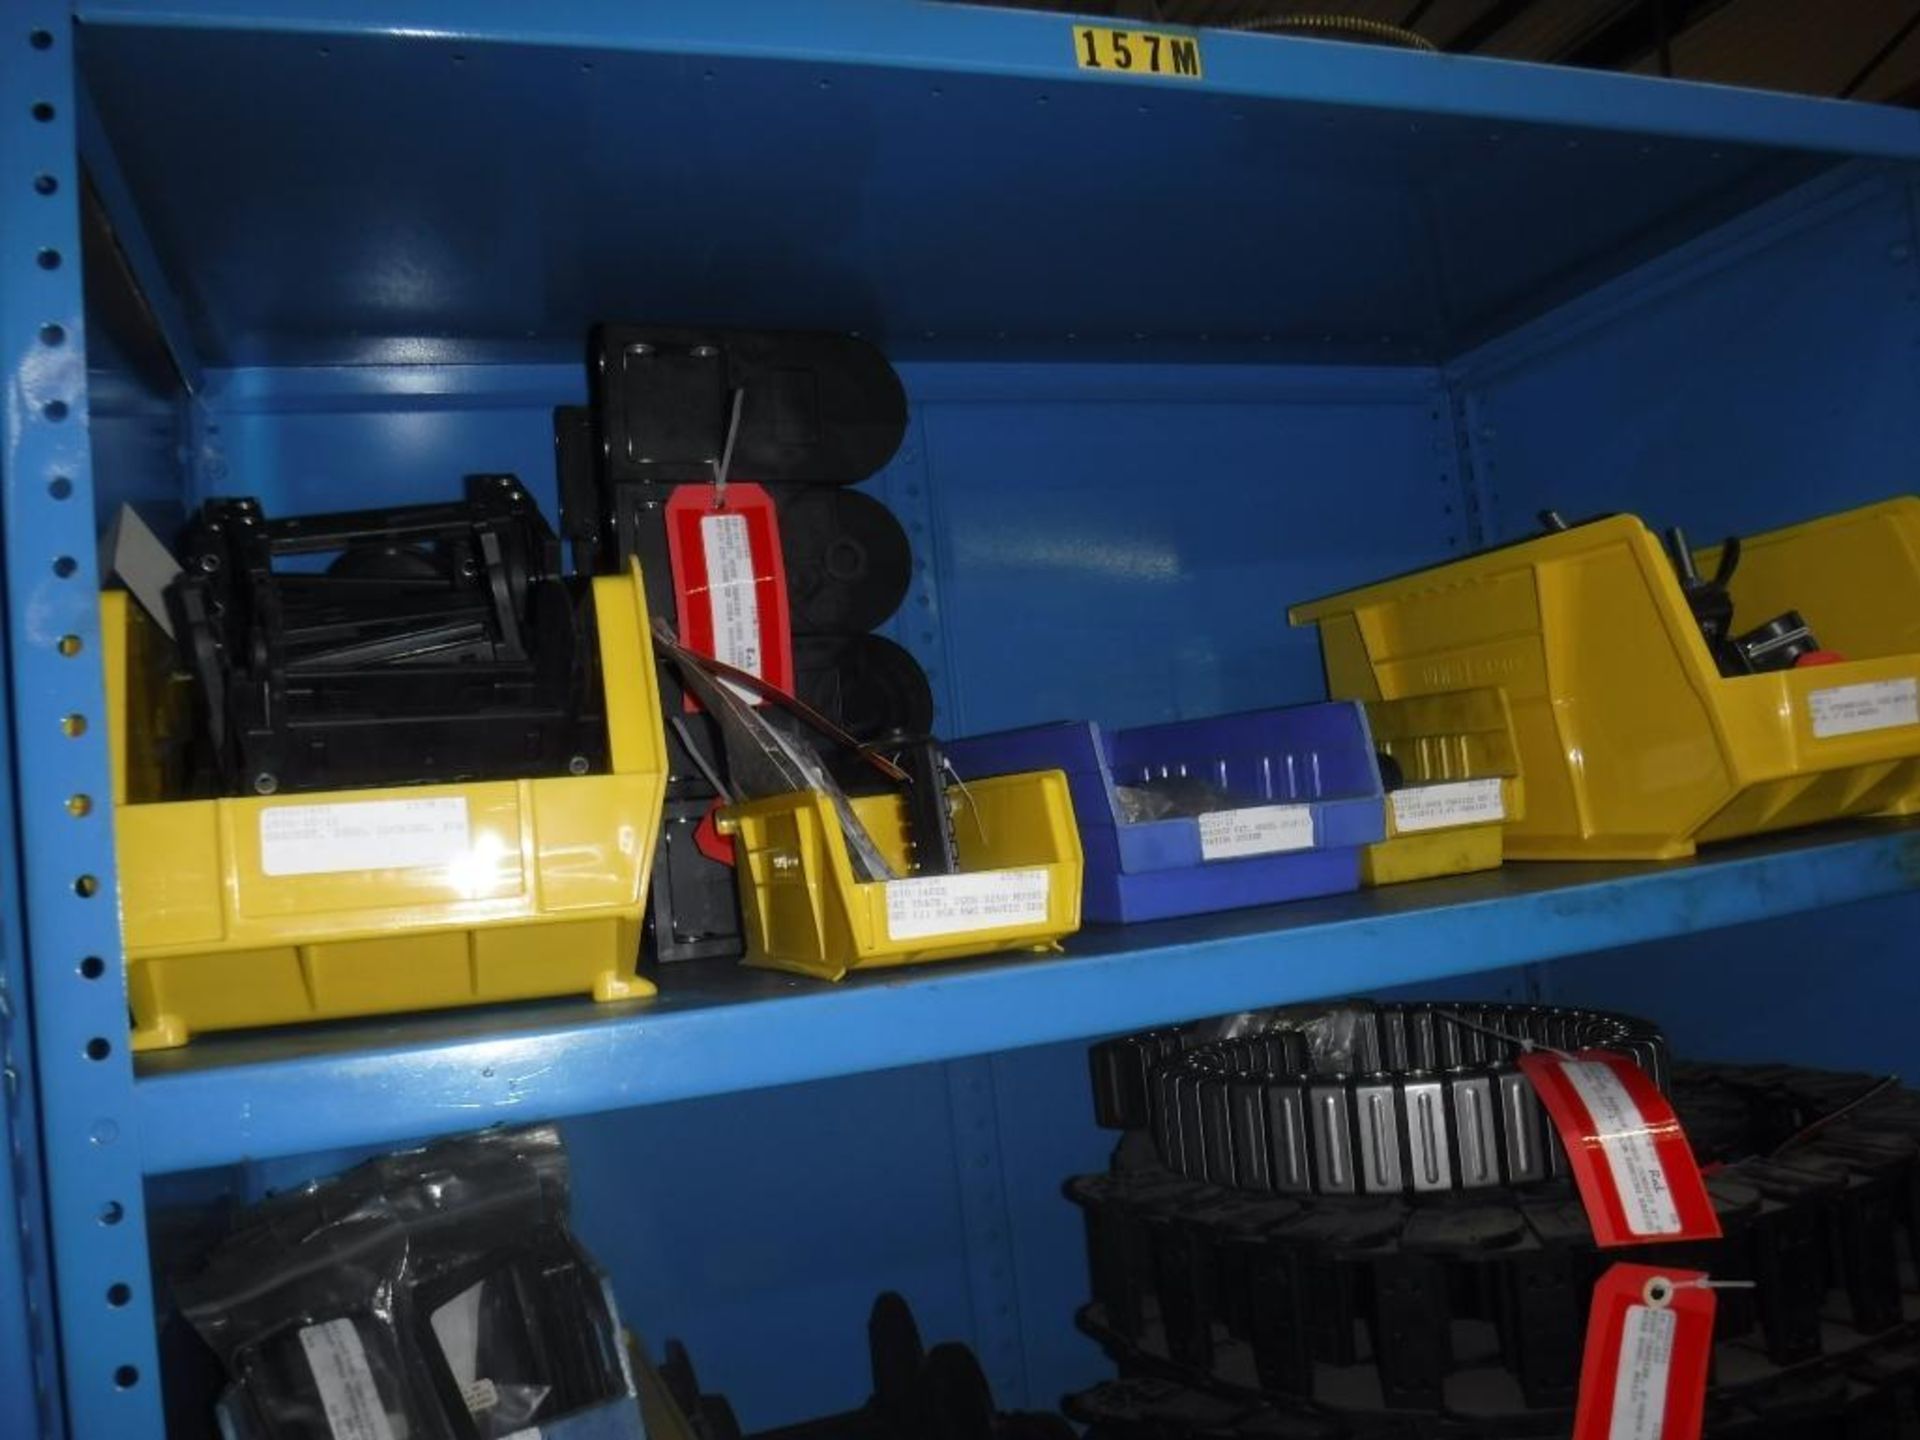 Contents of Shelving 155M Thru 164-5M-Pins,Valves,Shafts,Socket,Actuator,Idler Wheel,Wire Carrier,Ai - Image 7 of 33